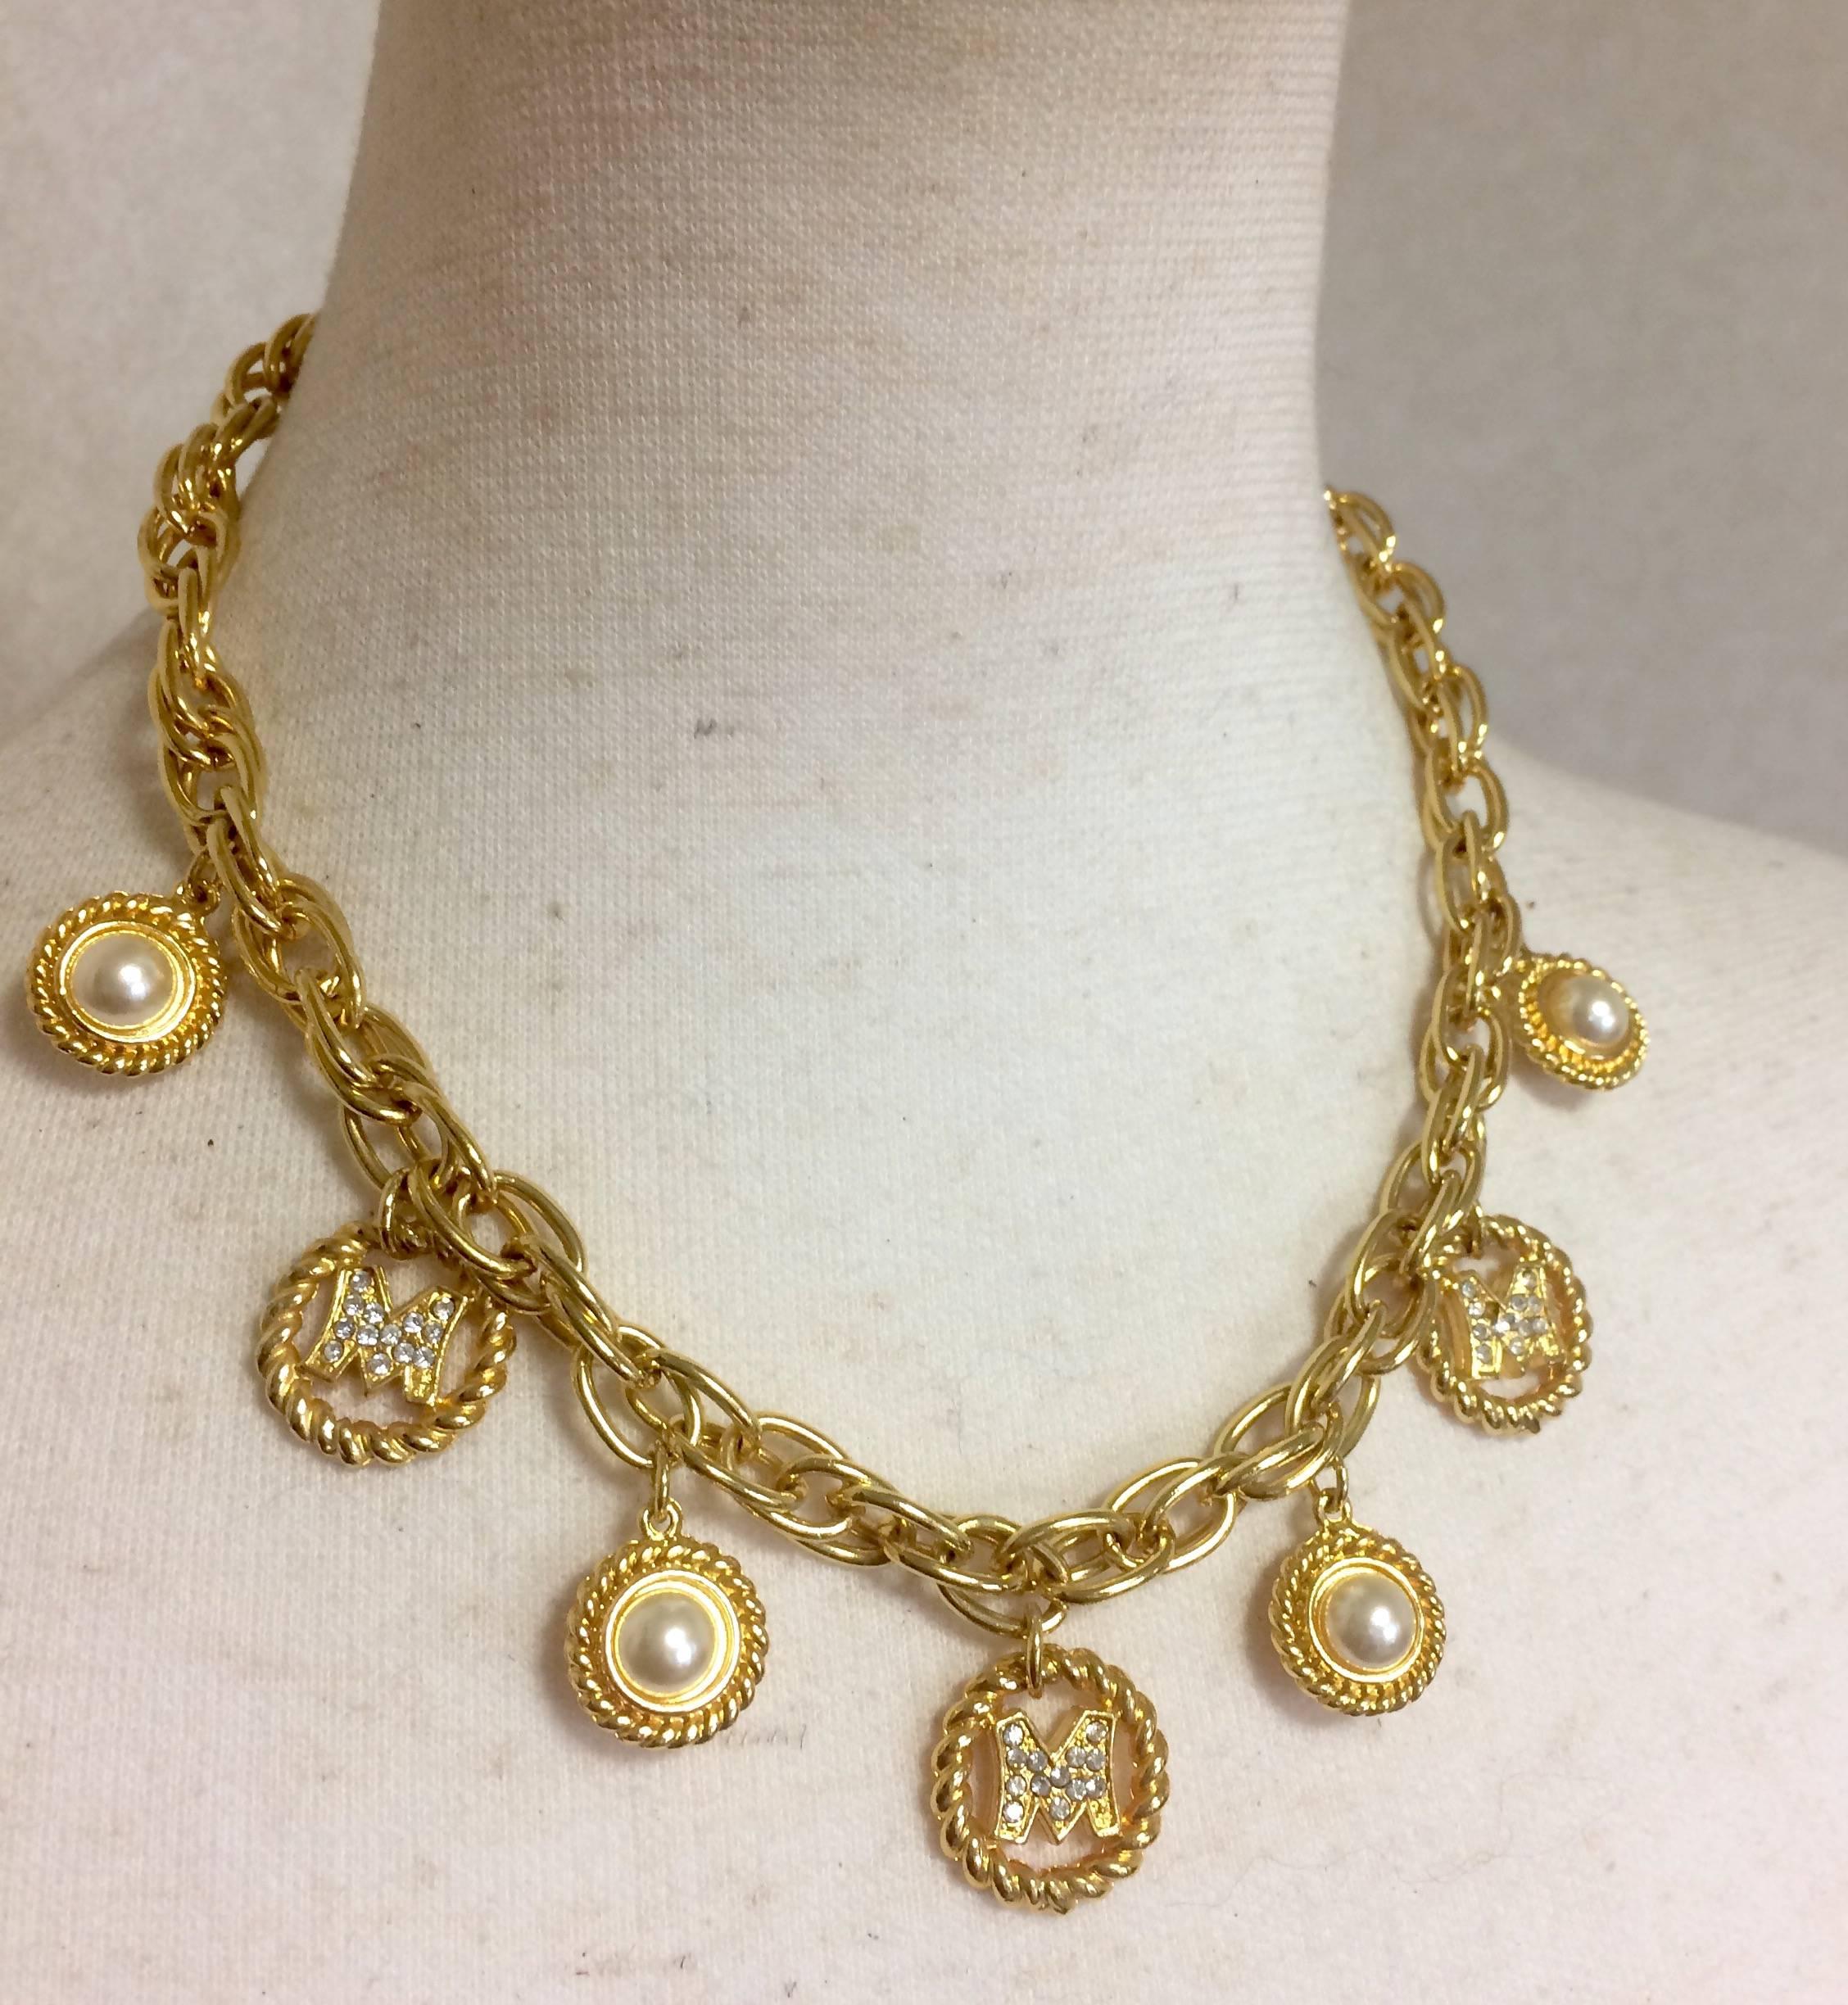 Vintage Moschino statement necklace with golden dangling charms with faux pearls For Sale 3